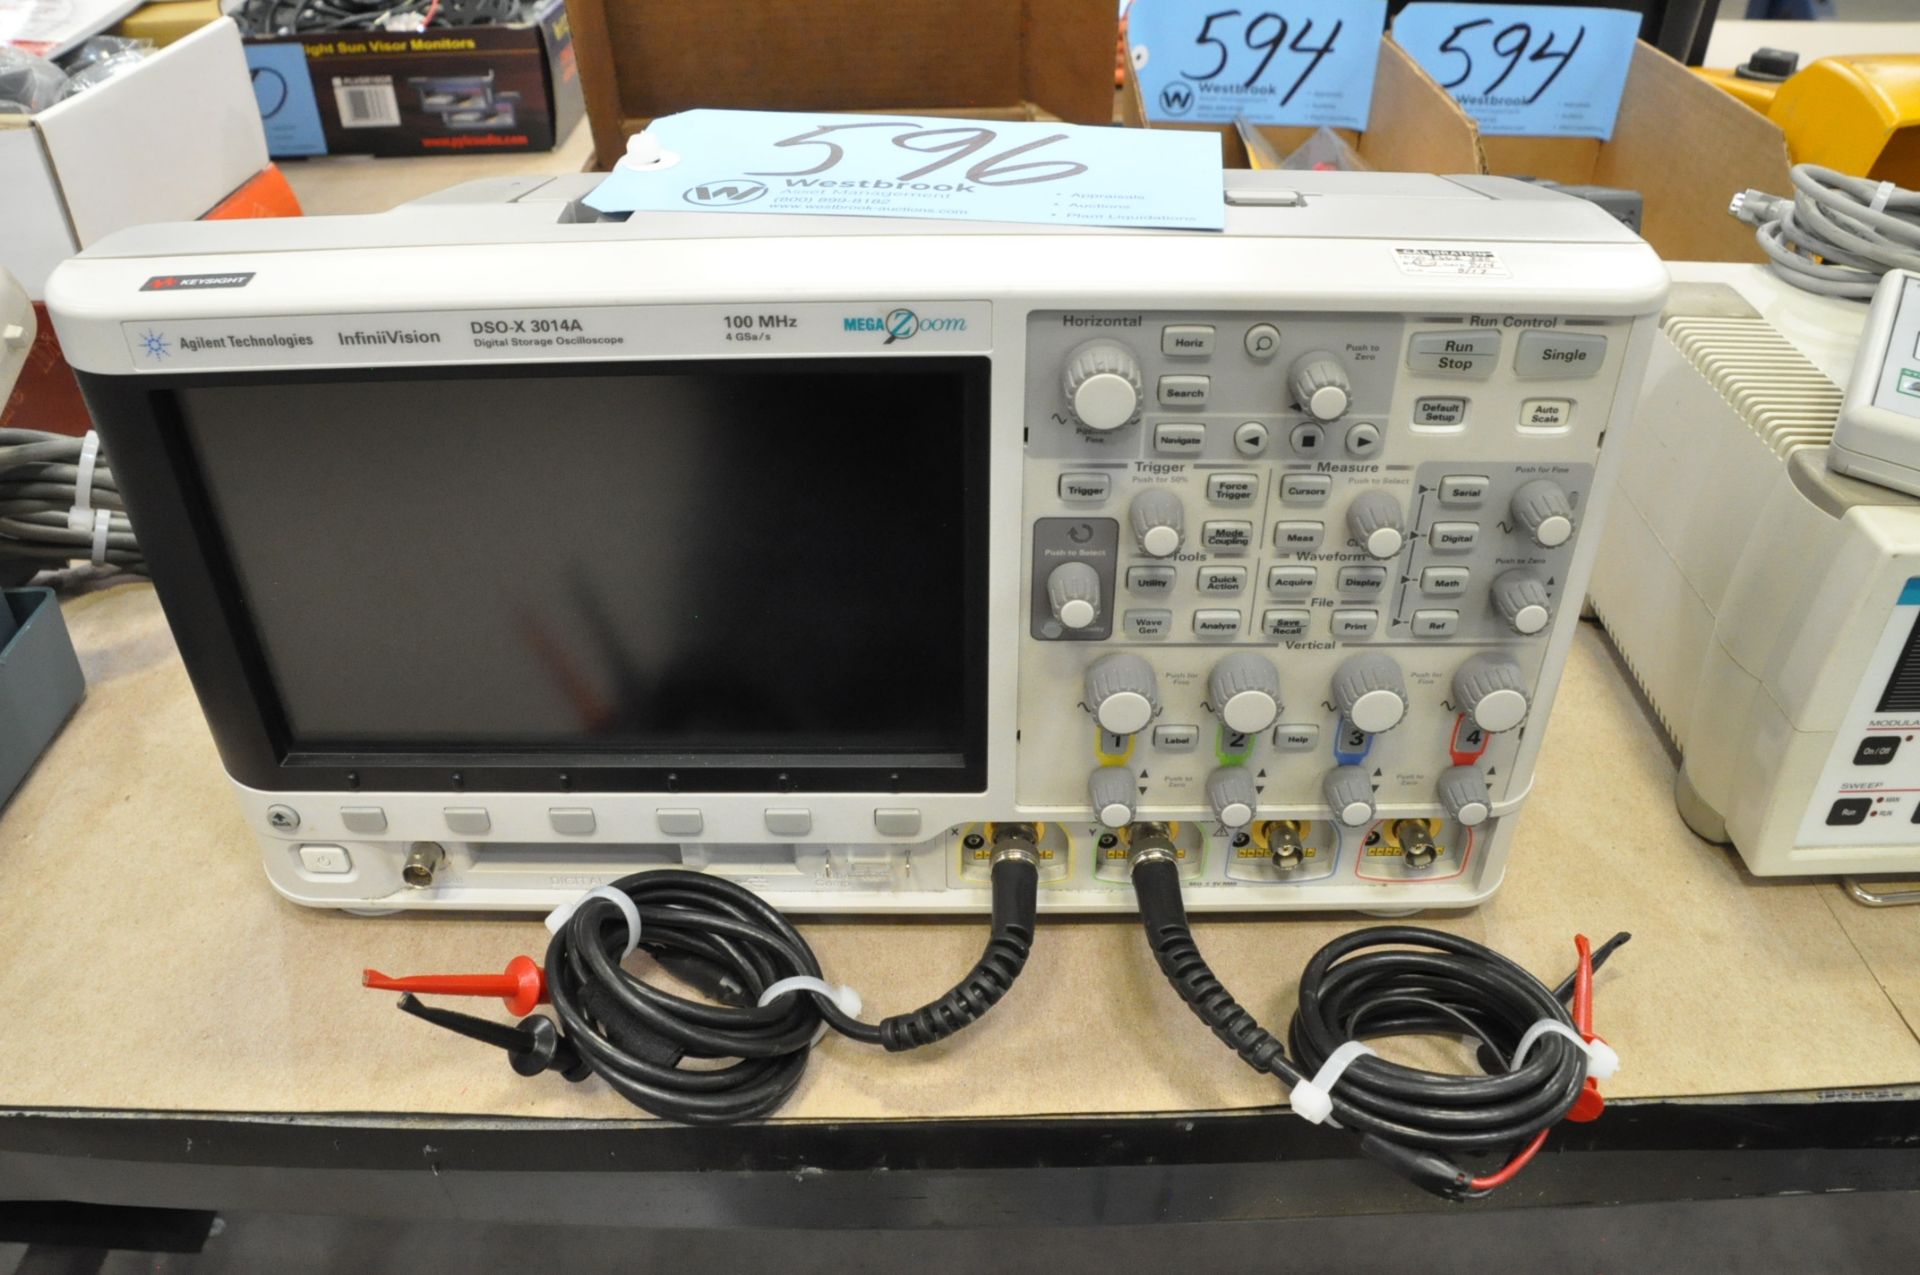 Agilent Technologies InfiniVision DSO-X 3014A, 100 MHZ Digital Storage Oscilloscope with Leads